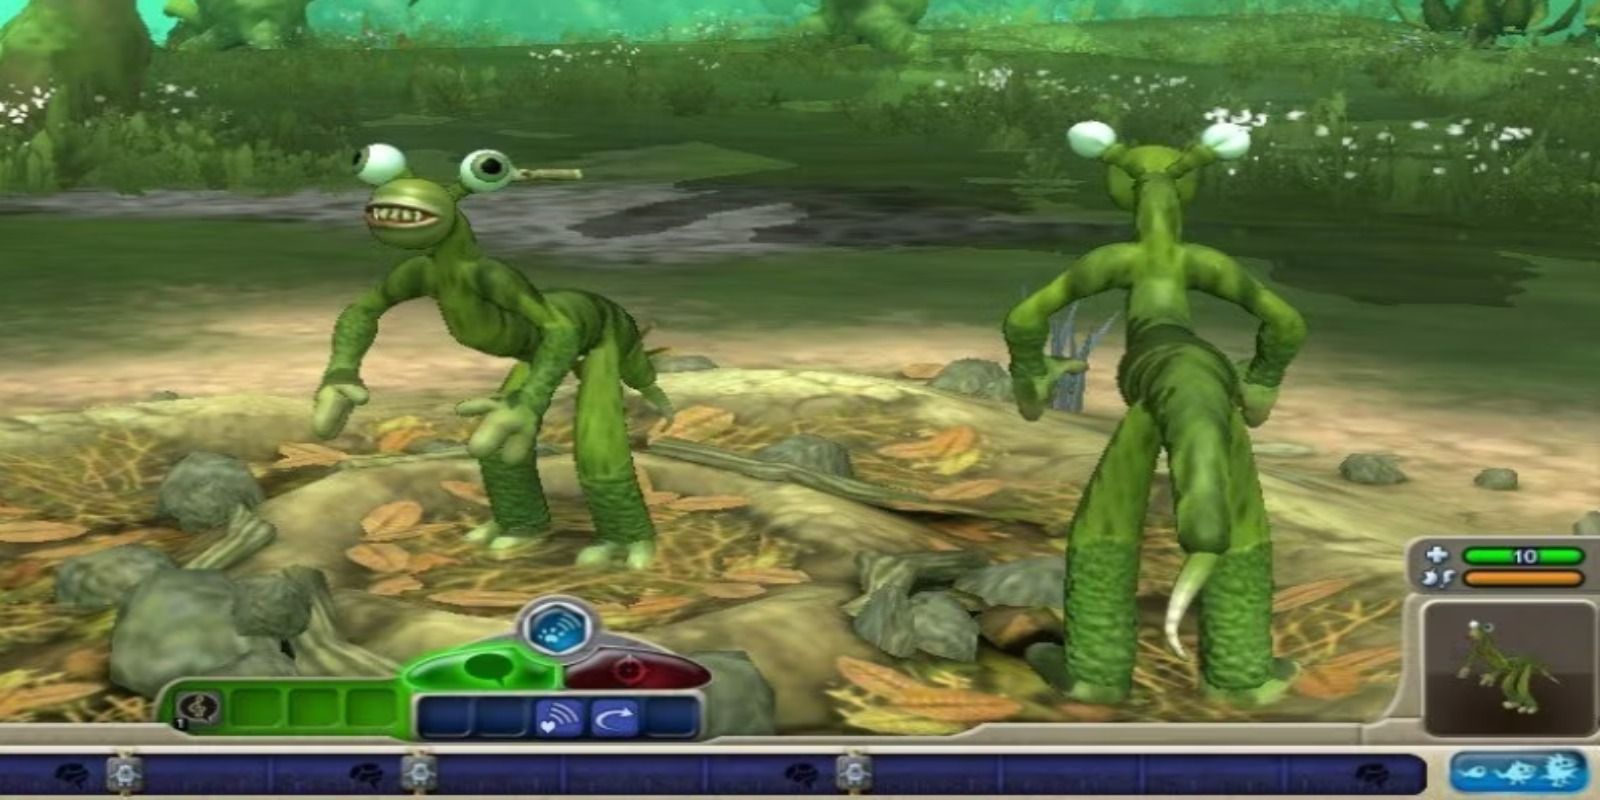 Spore two green creatures stand together